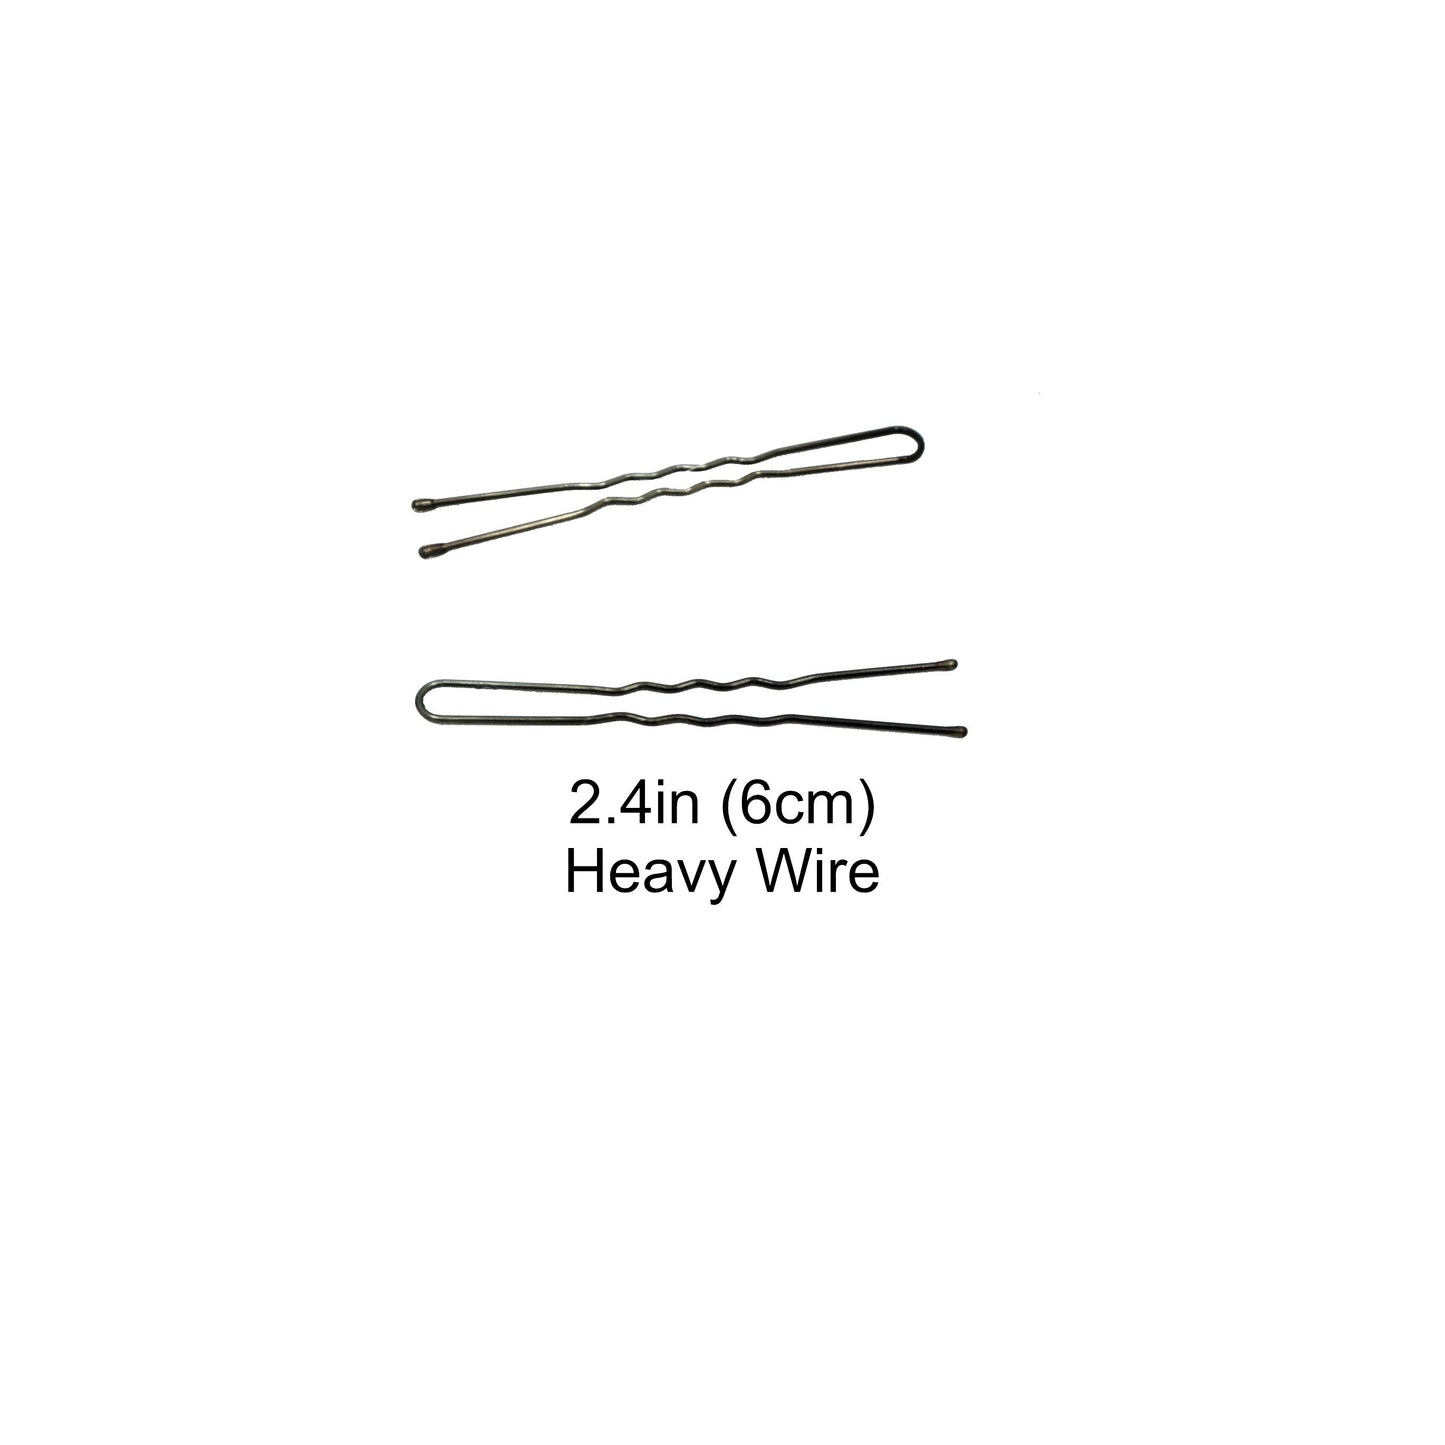 400, Black, 2.4in (6.0cm), Italian Made Heavy Waved Hair Pins, Recloseable Stay Clean and Organized Container